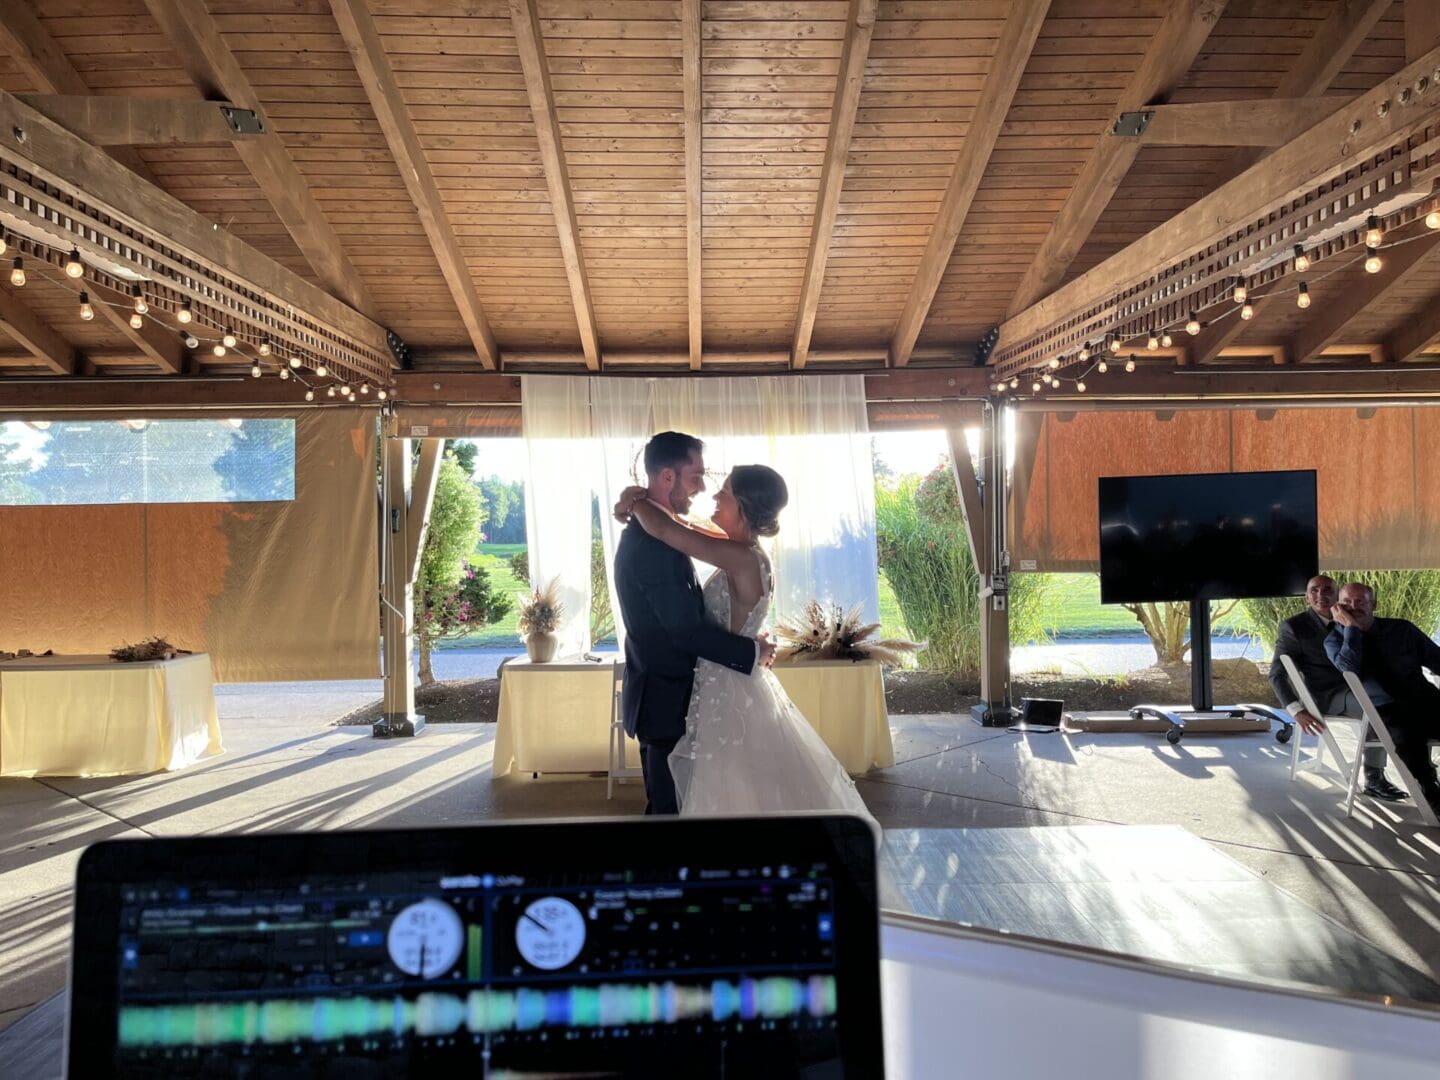 A couple is dancing in front of a tv.